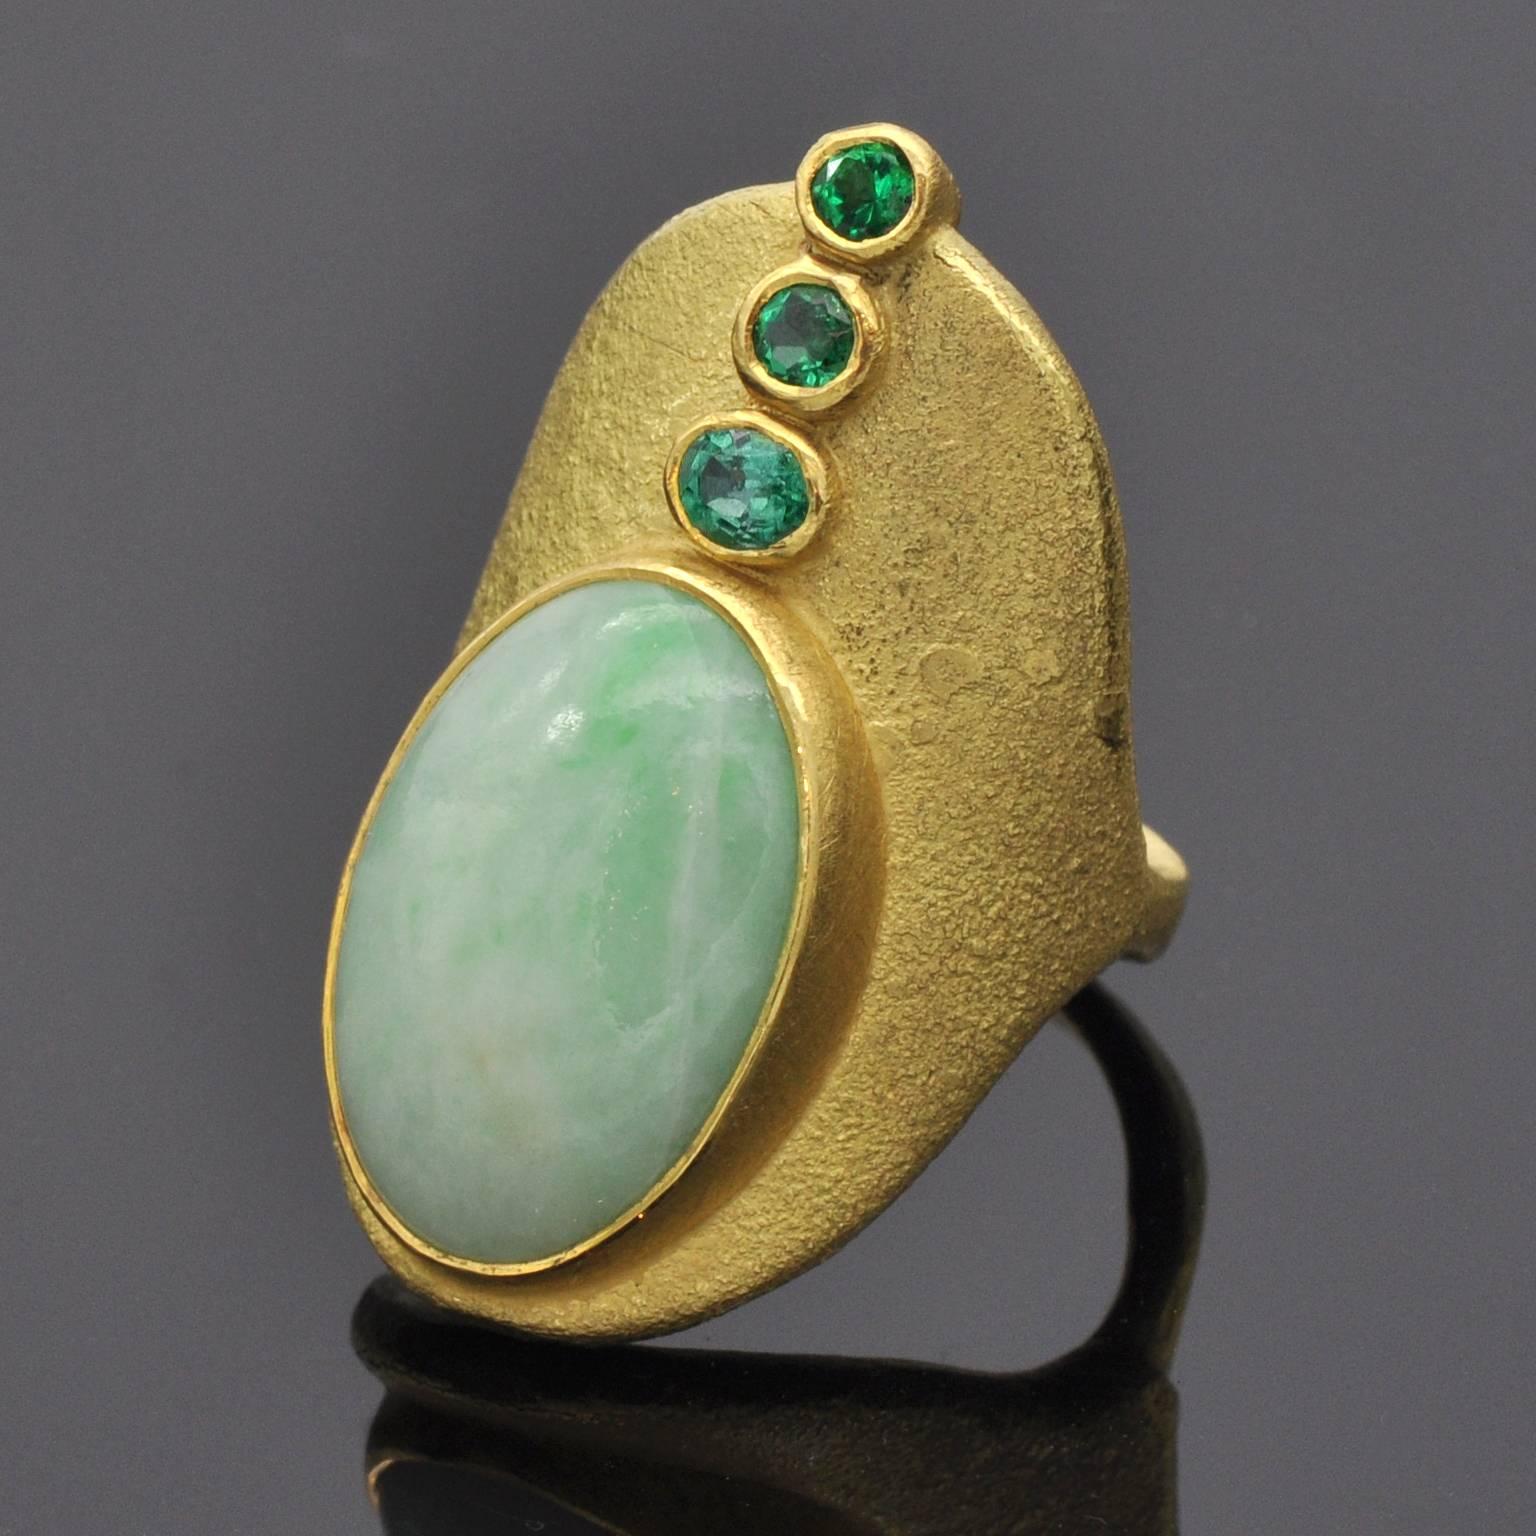 This unique modernist ring seems to get its ethnic inspiration from antique times. The jade (19.86 carat ) and three colombian emerald (0.49 carat)  are besel set . the ring itself is 18 and 22 Kt gold. 

Michael Zobel is considered one of the most